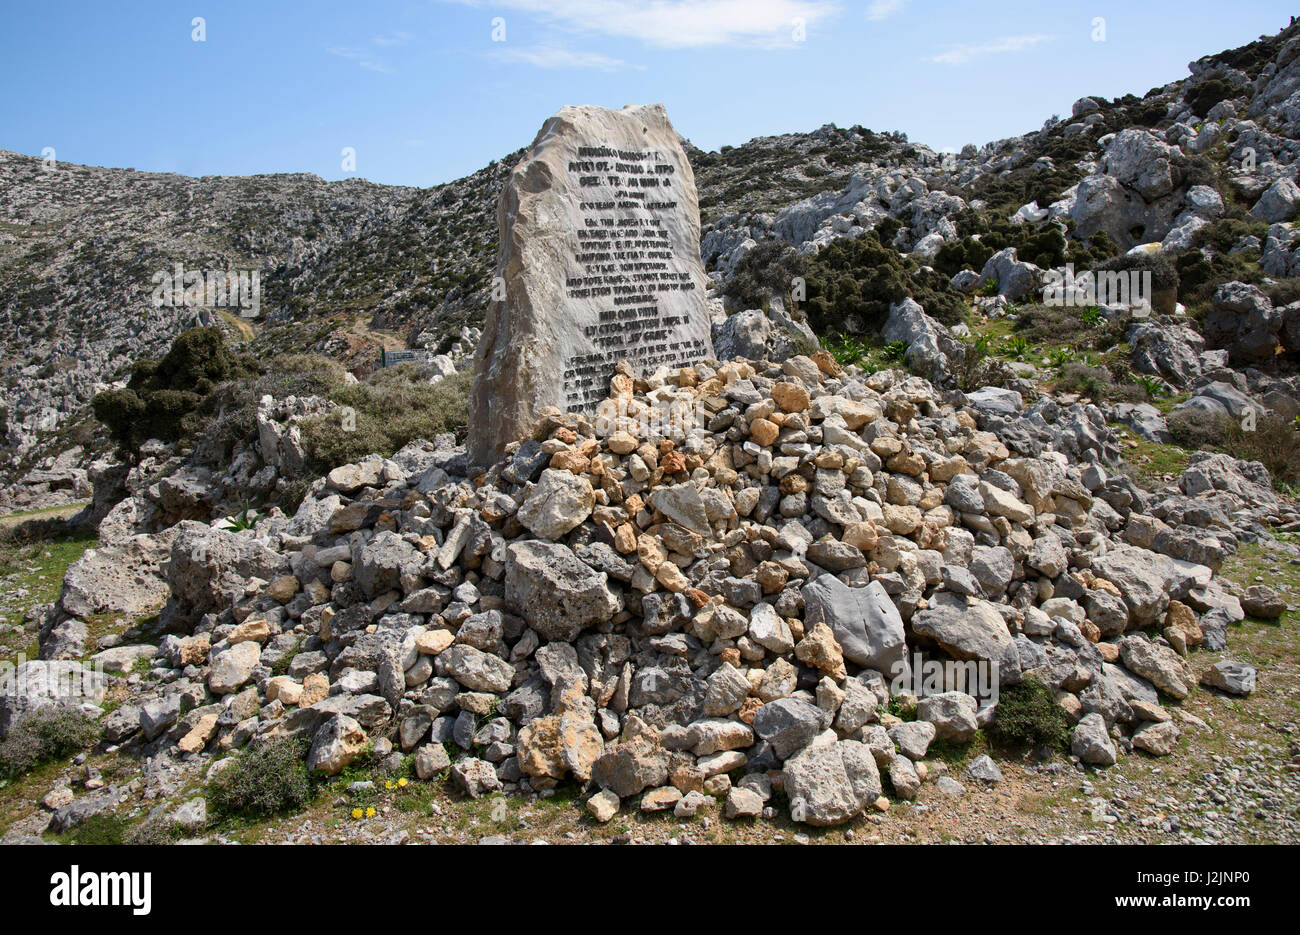 Tsoulis' Grave near Lasithi Plateau, Crete. A Turk executed by locals for his atrocities against Christians. Anyone passing adds their own rubble to t Stock Photo